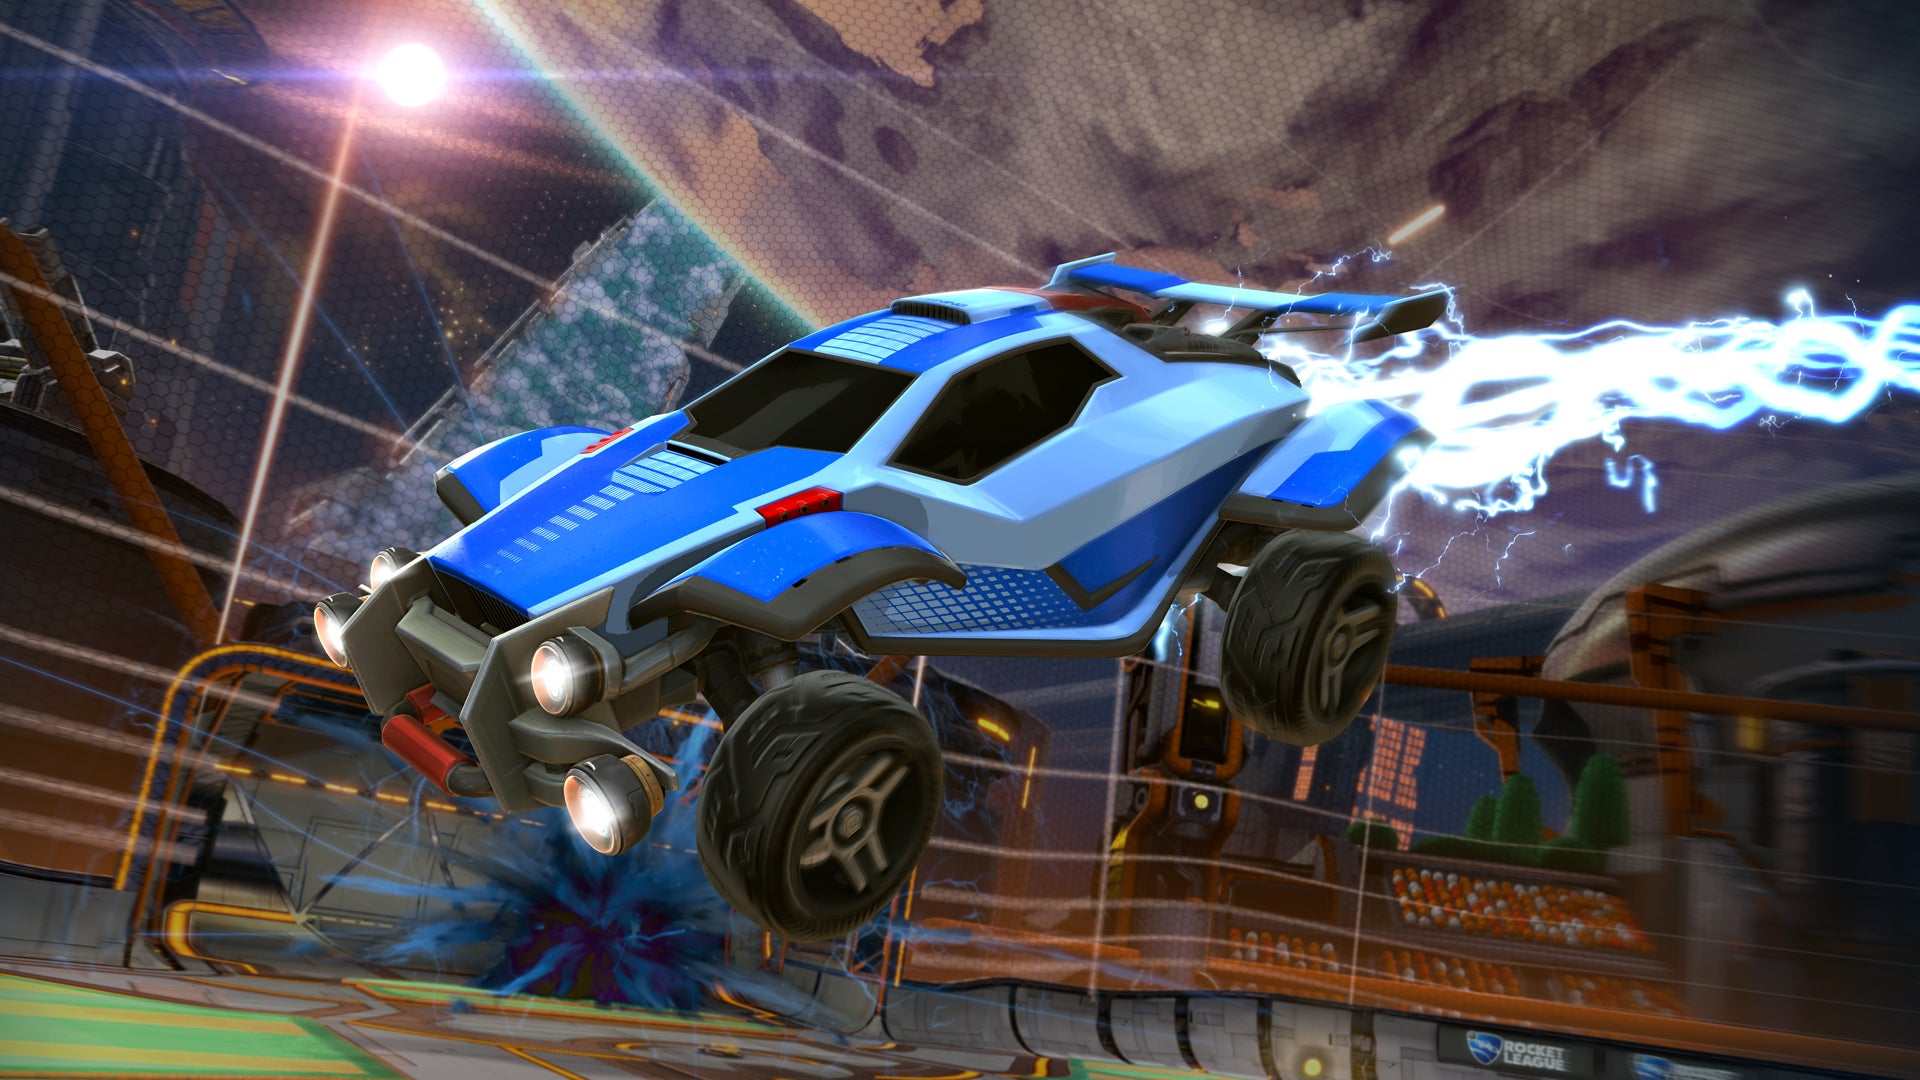 PS4 Pro Support Coming To Rocket League Image